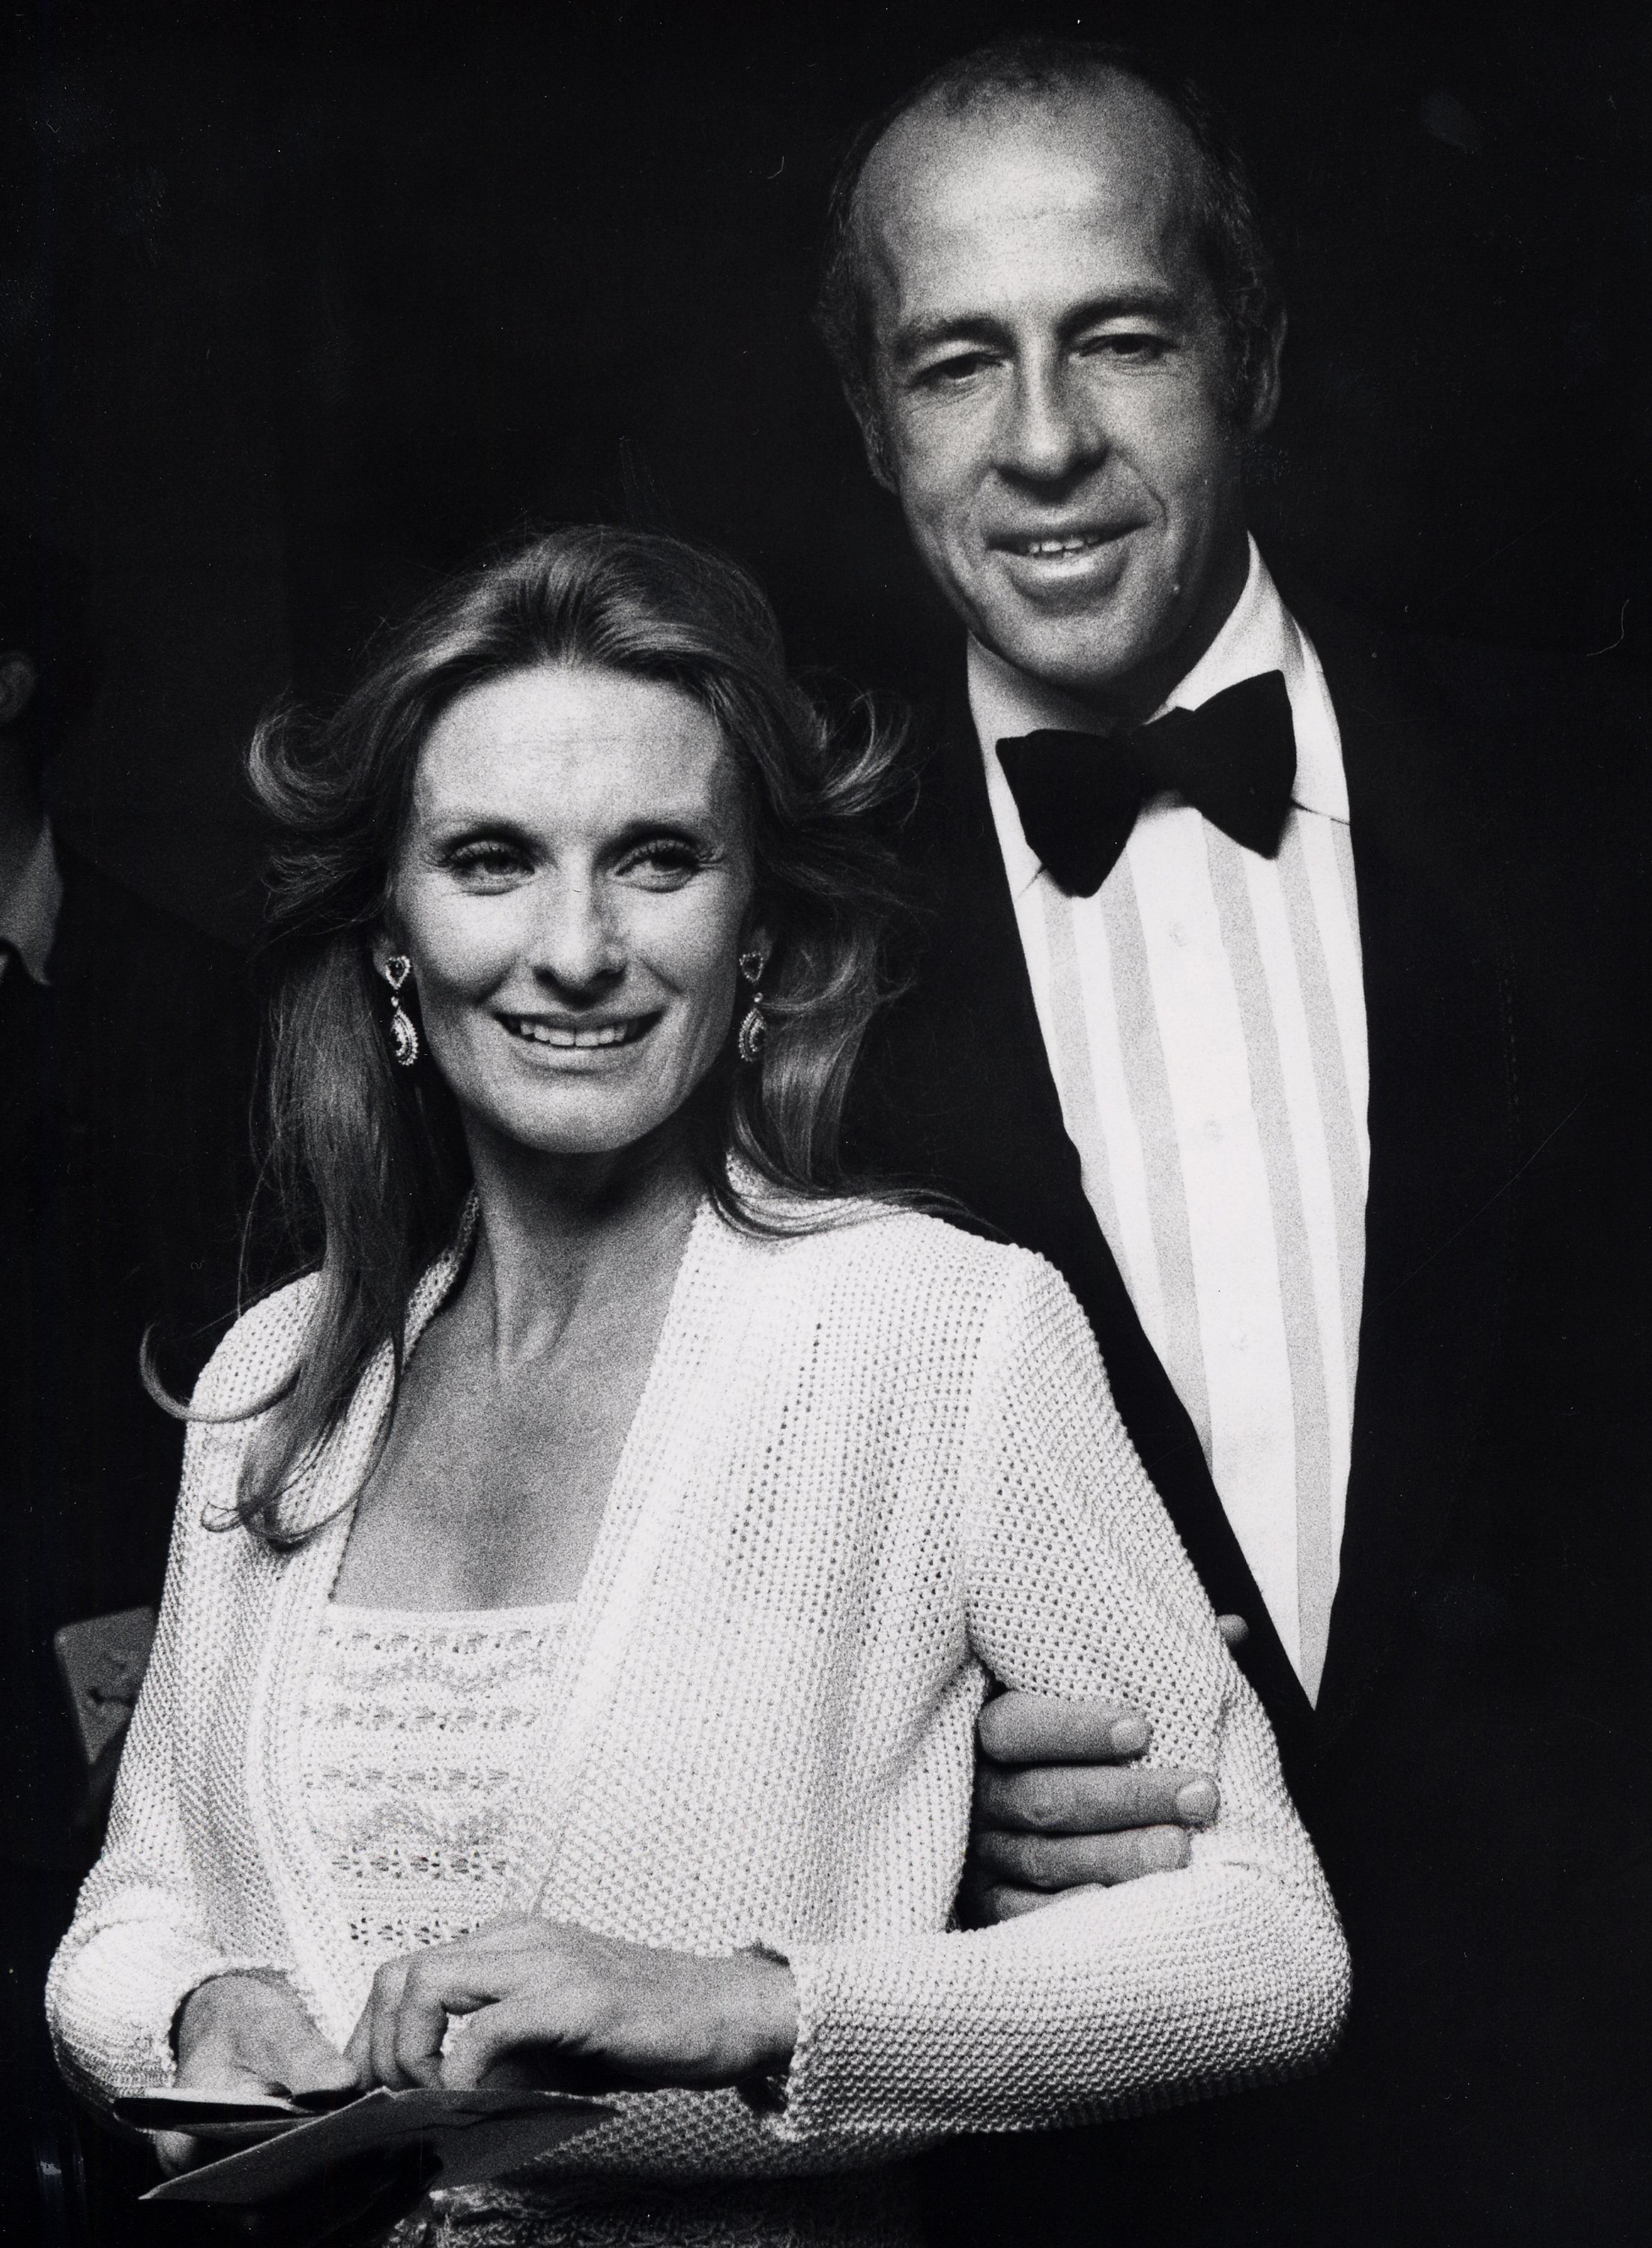 Cloris Leachman pictured with her husband, producer and film director George Englund at the Tony Awards Ball on April 21, 1974. / Source: Getty Images